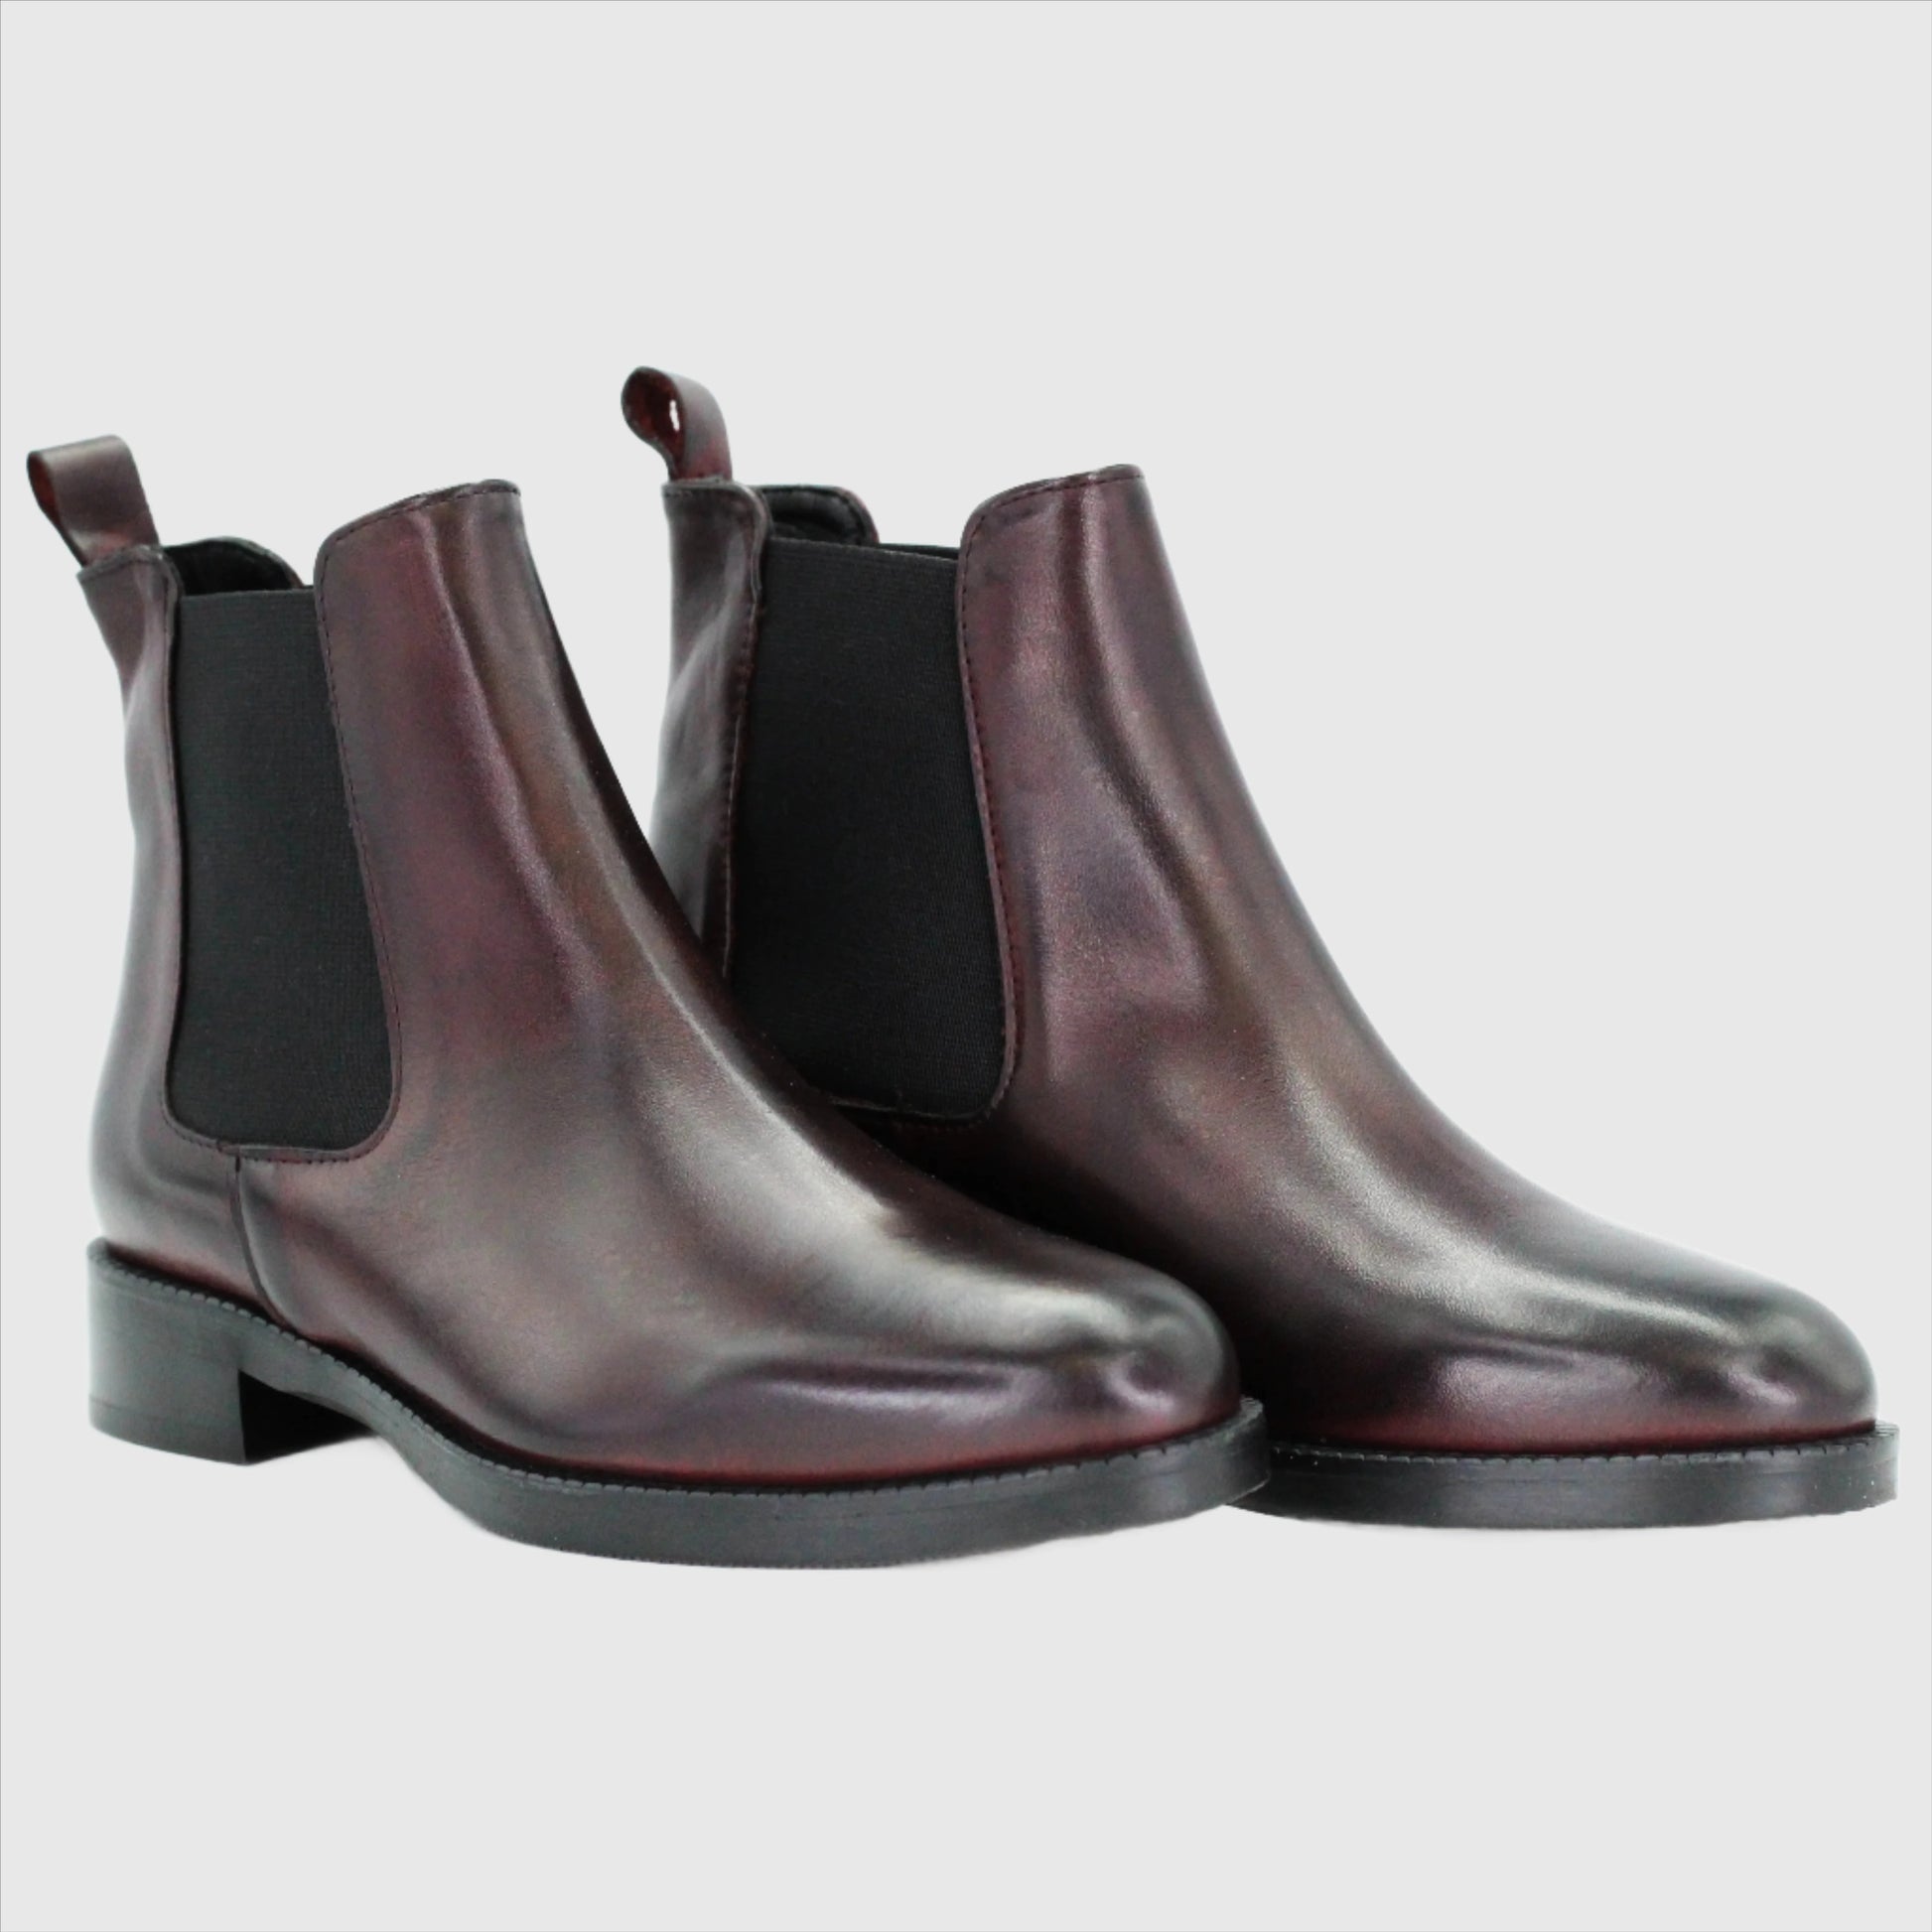 Shop Handmade Italian Leather chelsea boot in nature burnet (GC2030) or browse our range of hand-made Italian shoes in leather or suede in-store at Aliverti Cape Town, or shop online. We deliver in South Africa & offer multiple payment plans as well as accept multiple safe & secure payment methods.